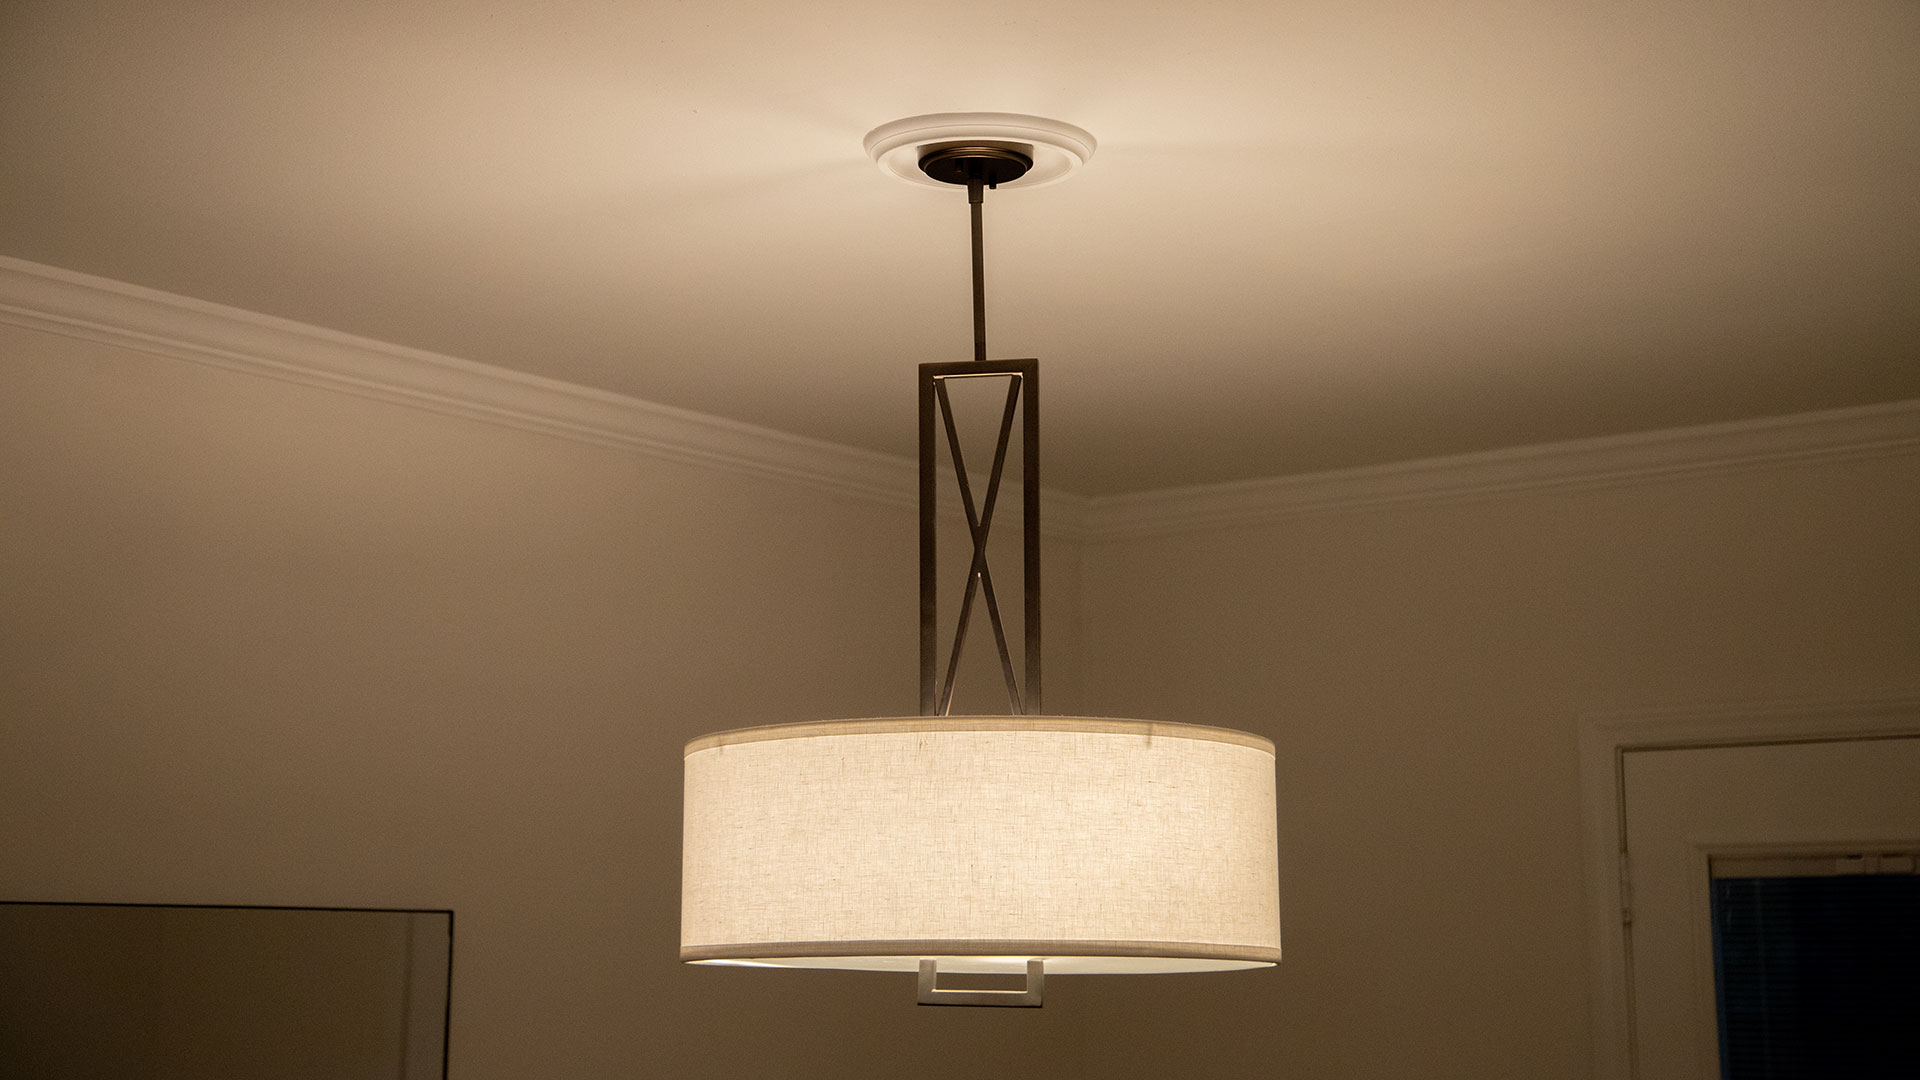 How To Install A Ceiling Medallion, How To Install Ceiling Light Medallion